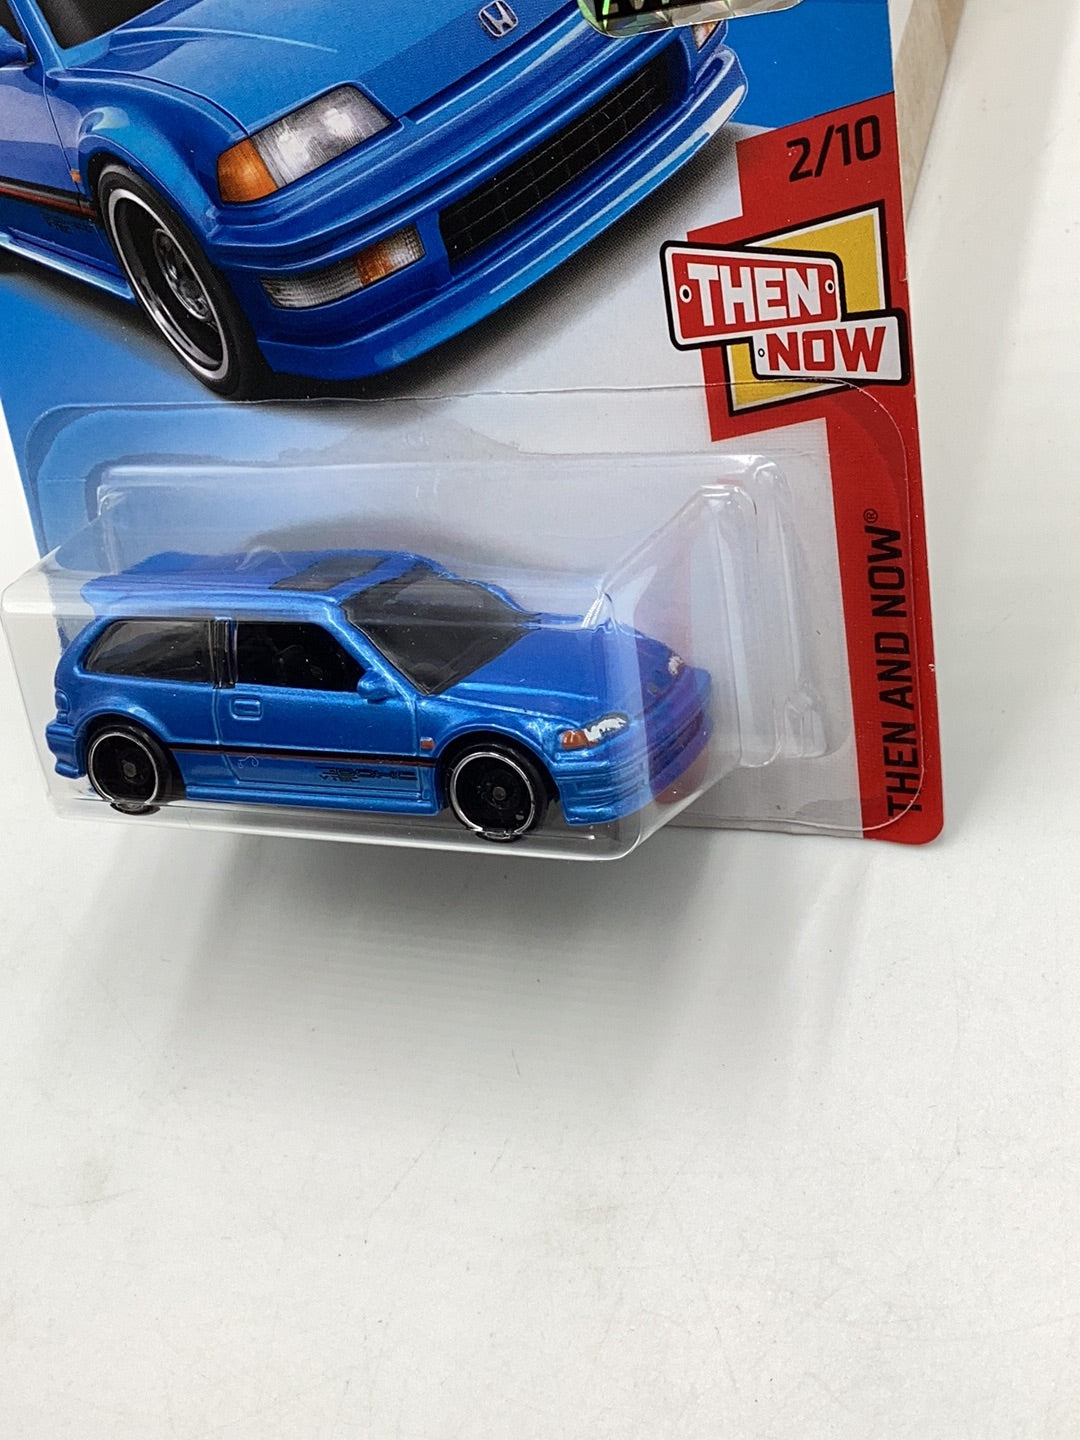 2018 hot wheels 90 Honda Civic EF Kmart exclusive htf!!! Factory sealed sticker With protector